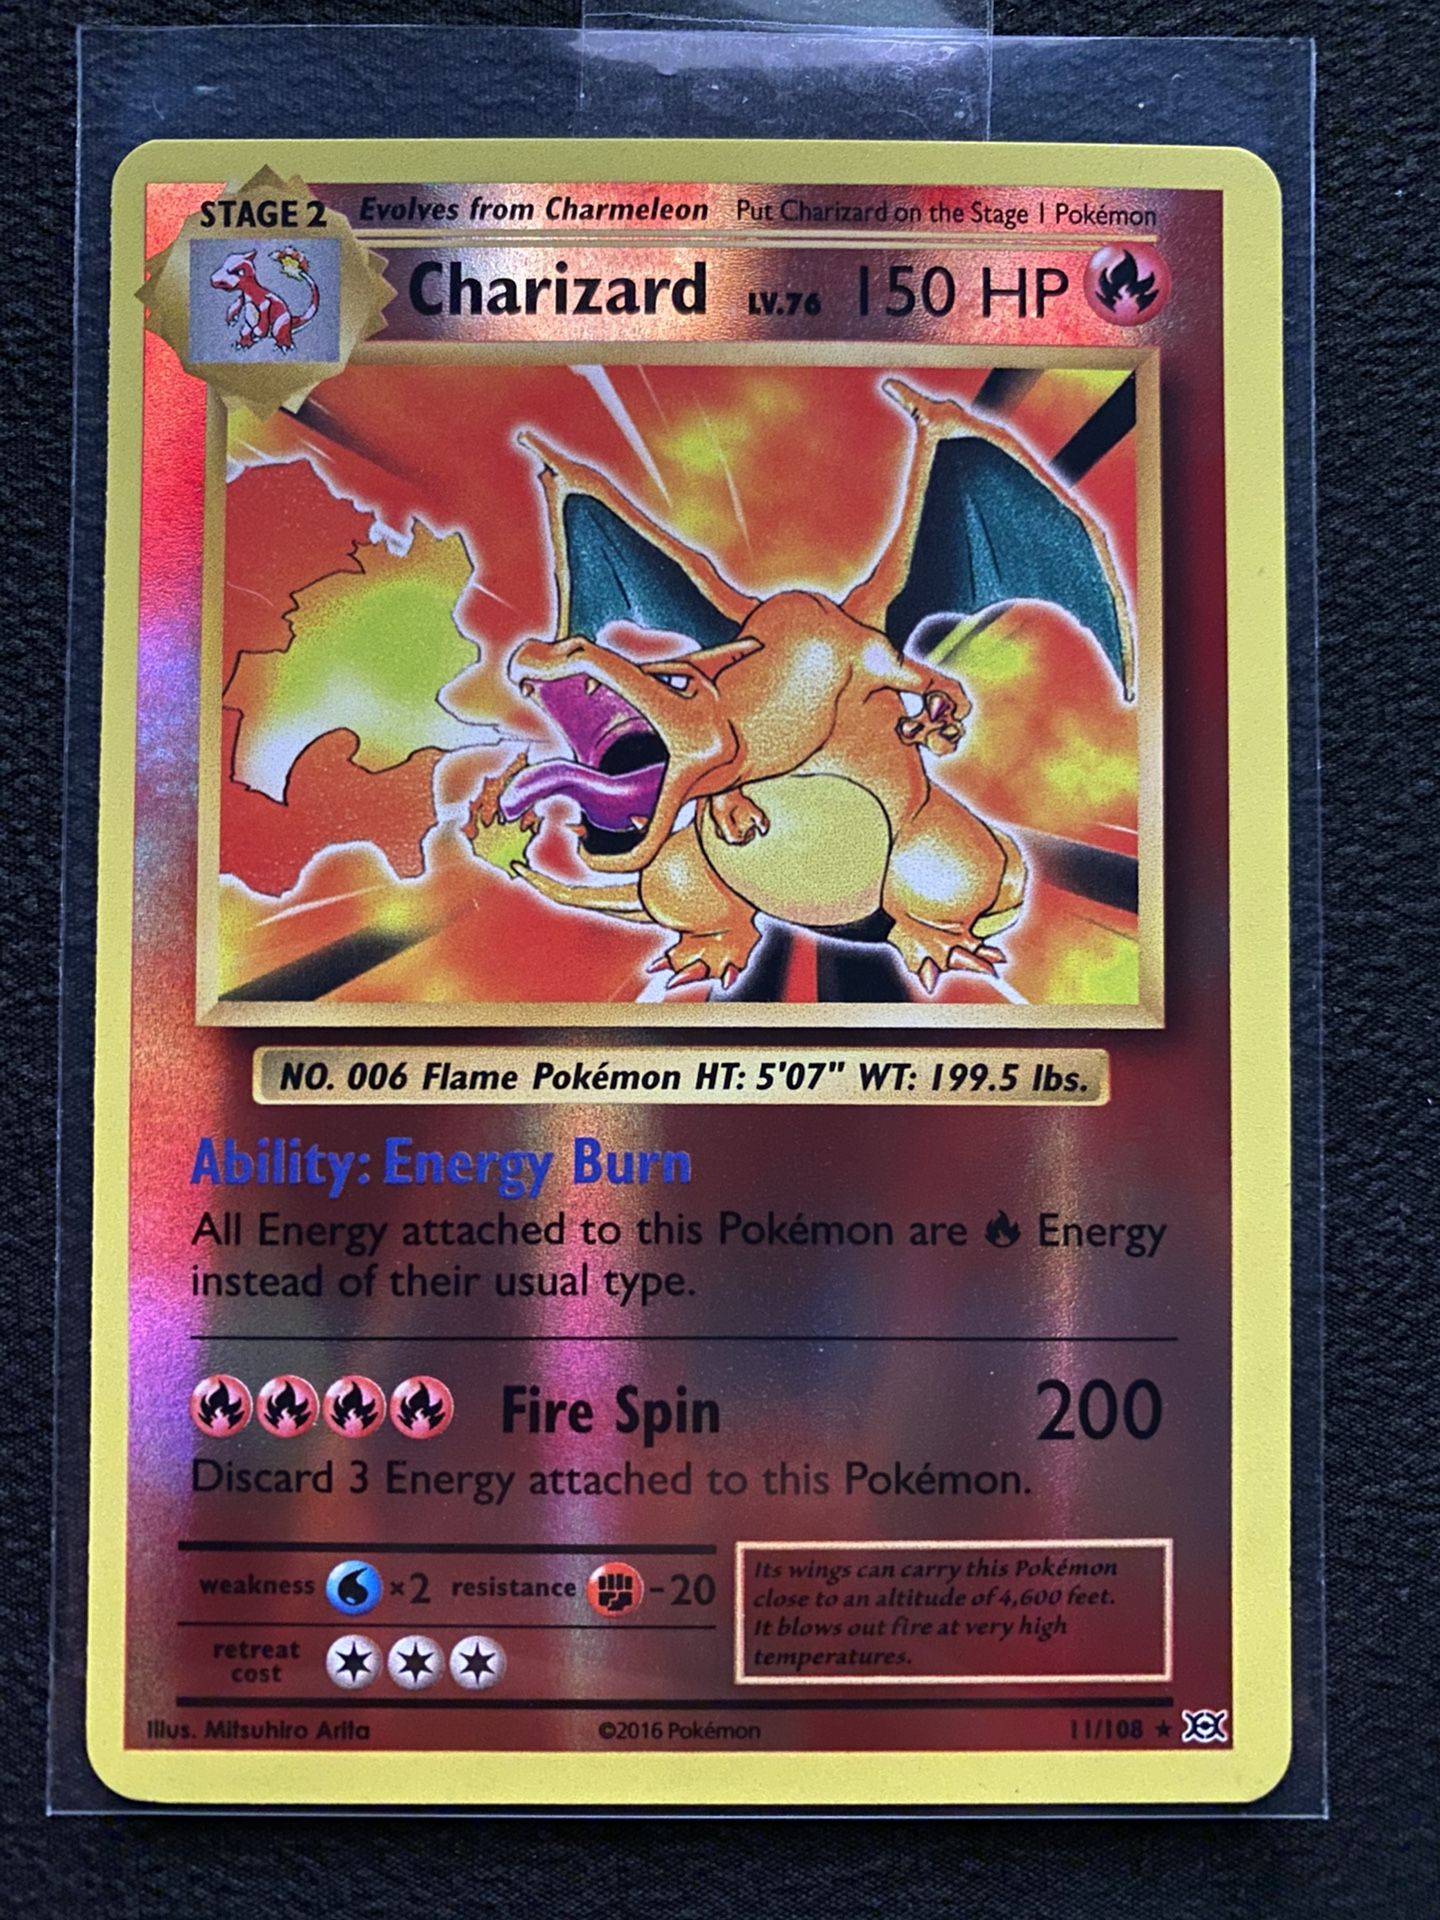 XY Evolutions Reverse Holo Charizard 11/108 MINT Condition English Card Sleeved